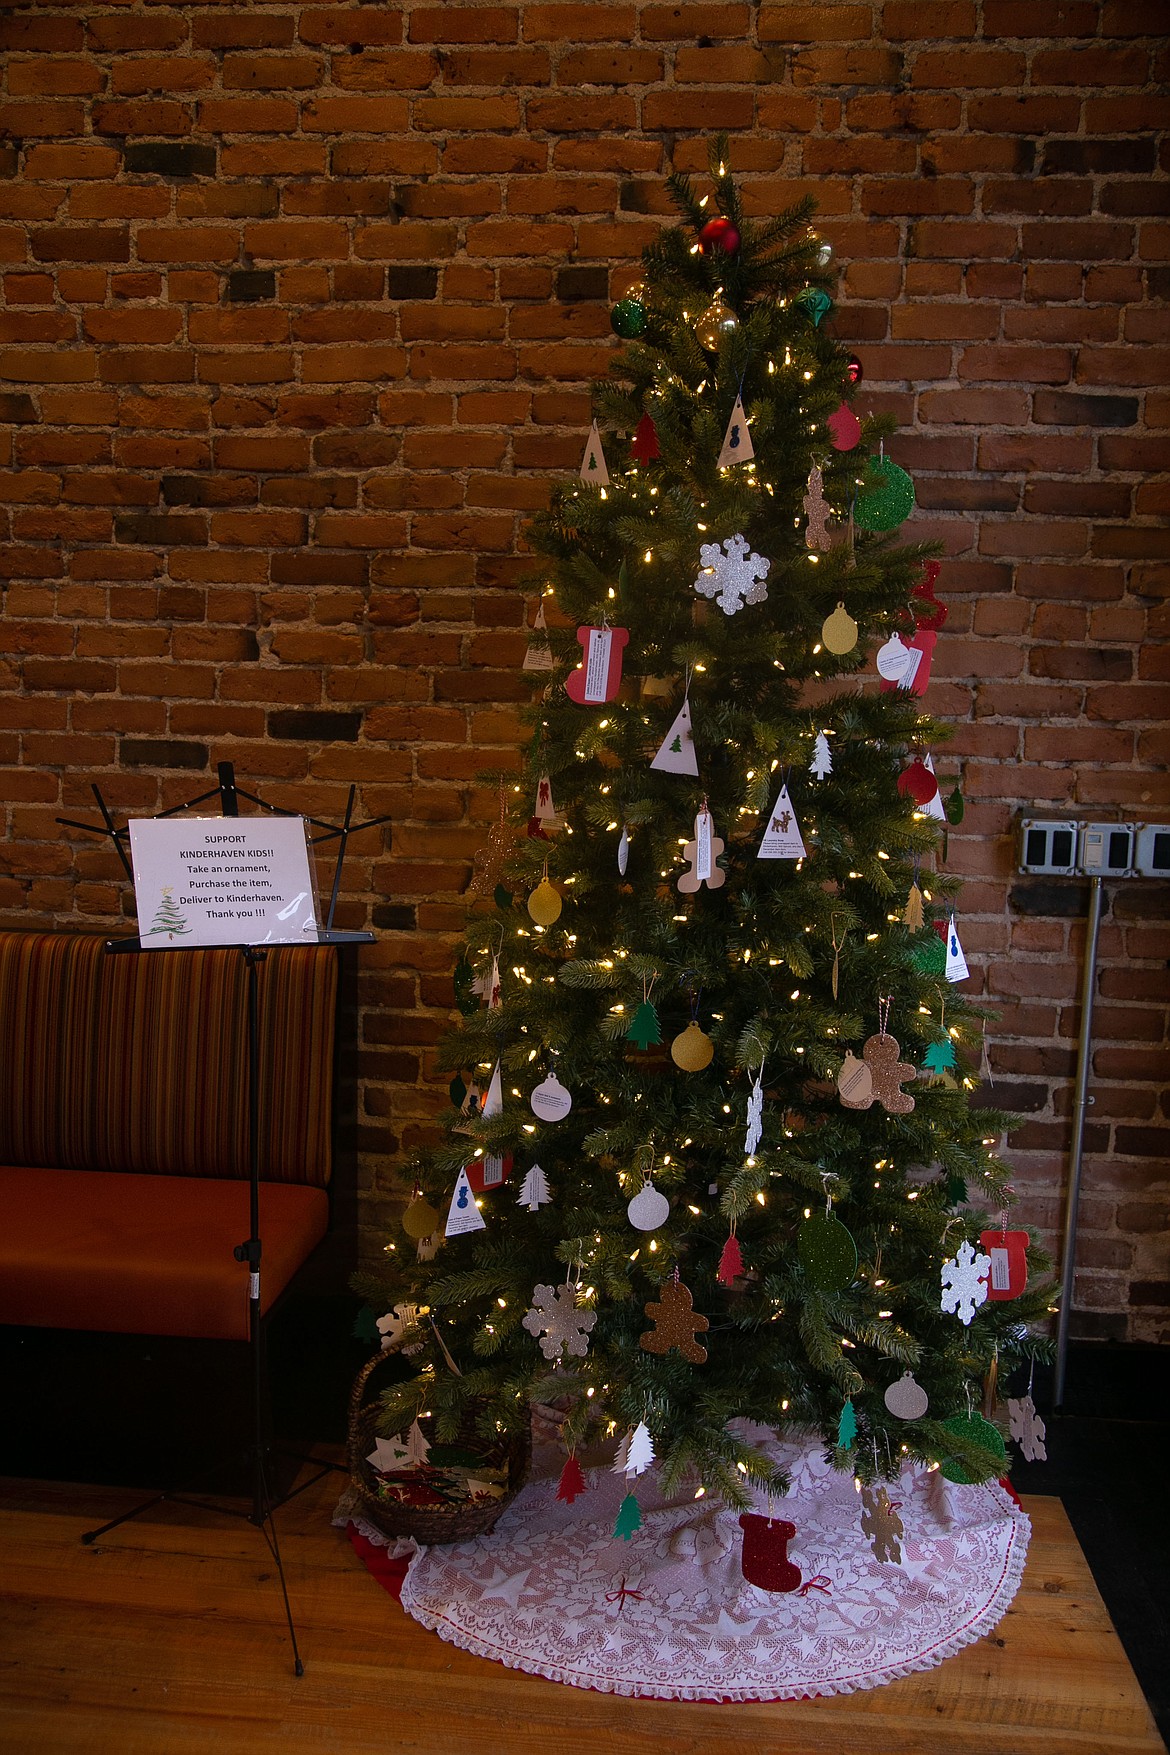 Silent auction items for Kinderhaven's "Tour of Trees" fundraiser can be viewed in person at the Kinderhaven headquarters, 113 Main Street, through Dec. 11.